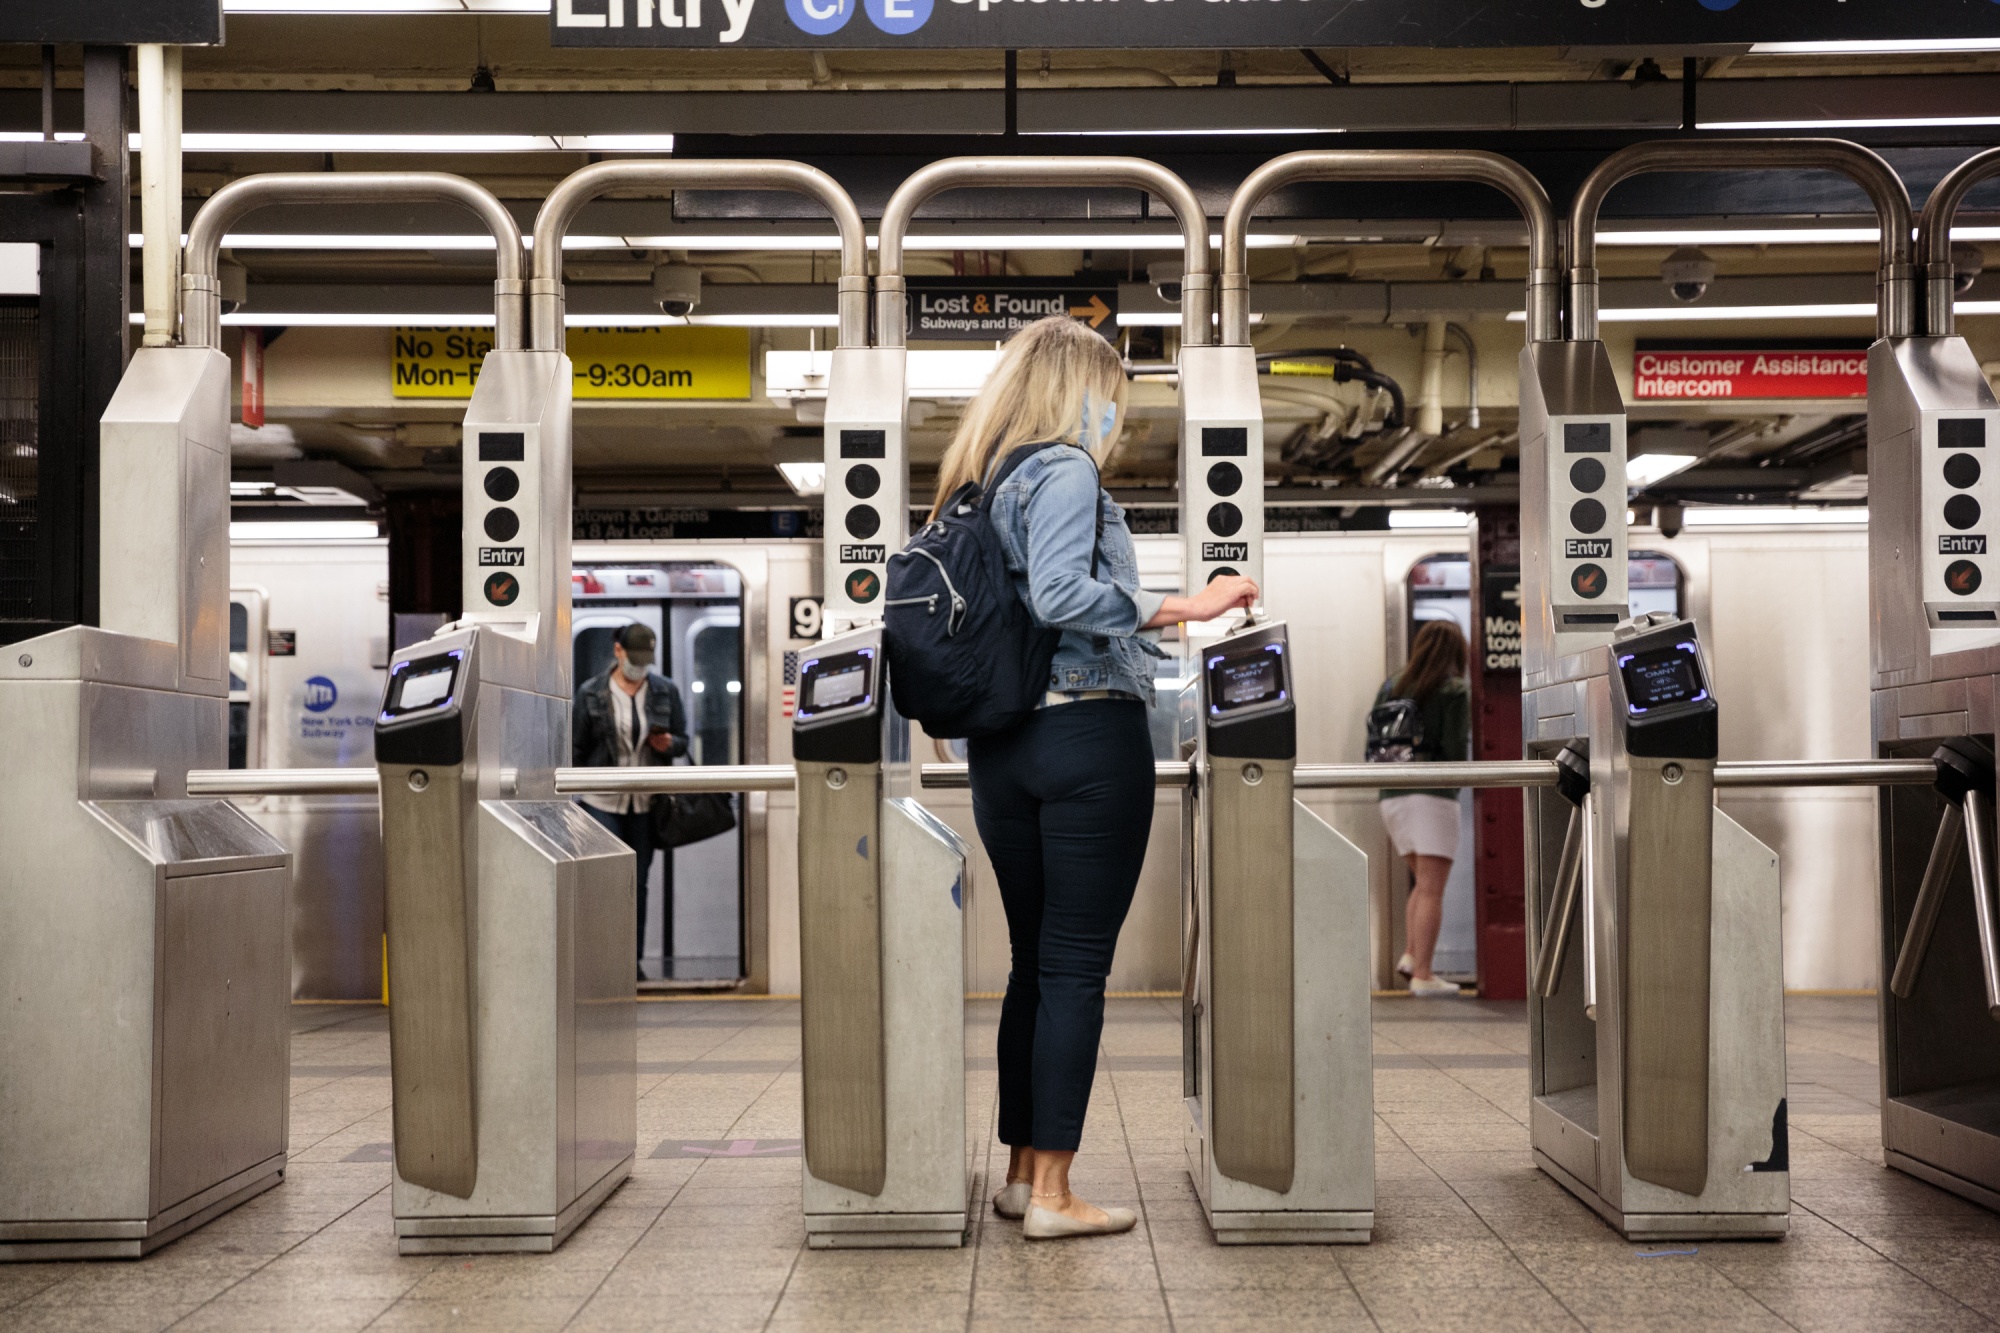 NYC Subway Fares May Hit 3.05 in 2025 in Latest MTA Fare Hike Bloomberg